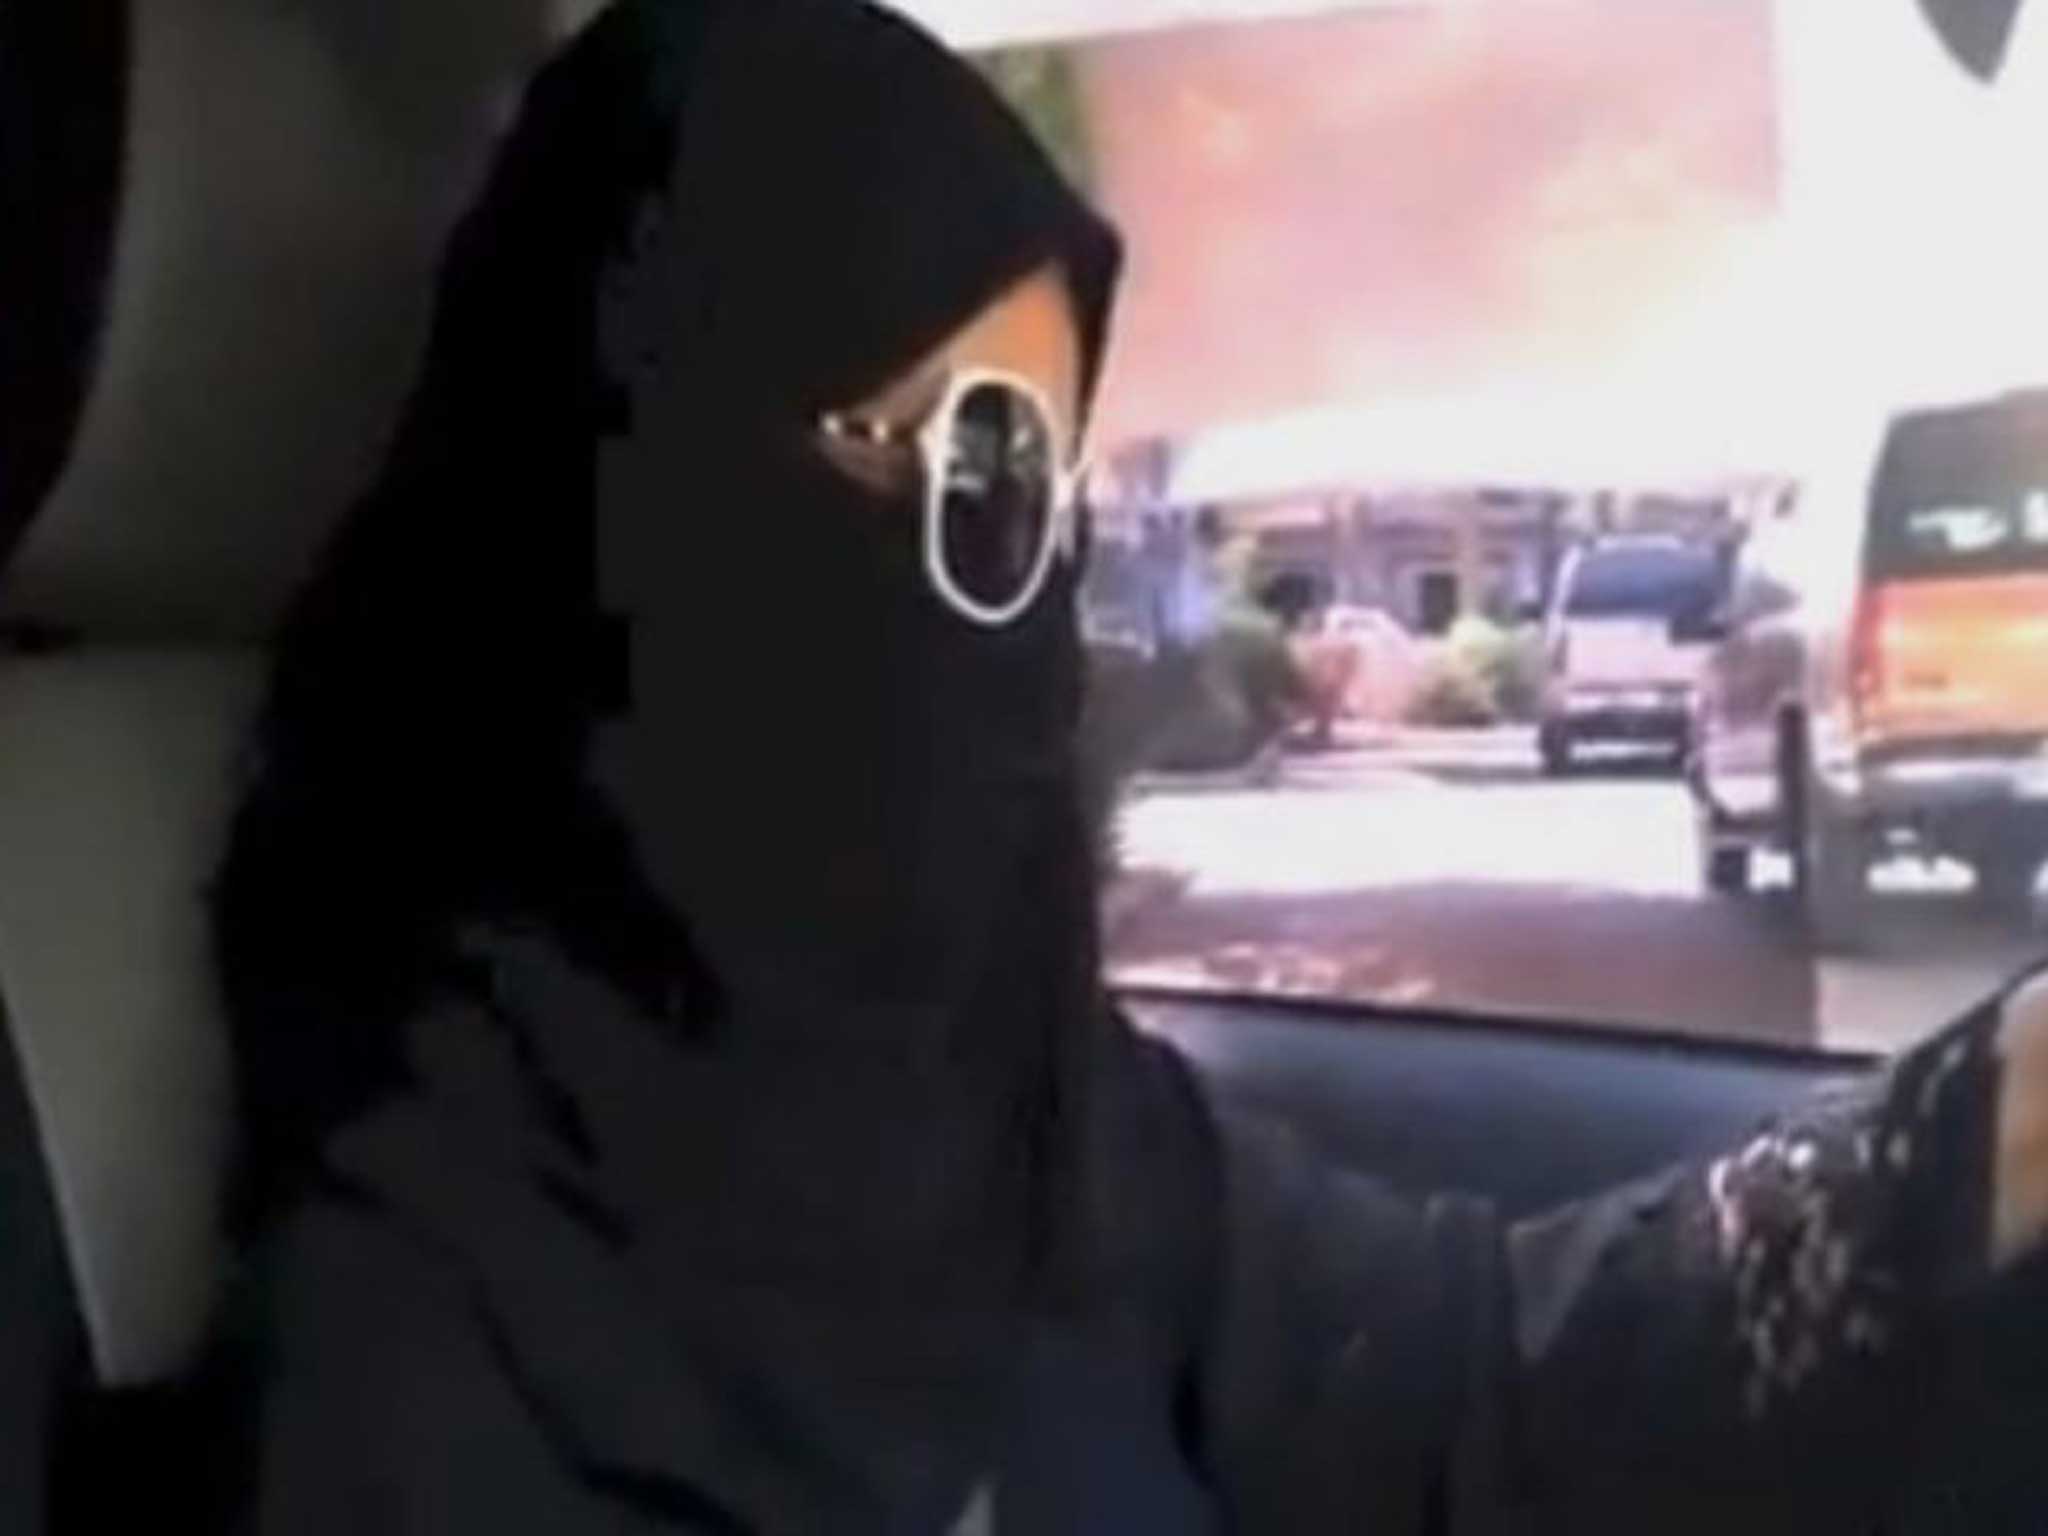 Hot seat: A Saudi woman driving to the grocery store in Riyadh yesterday